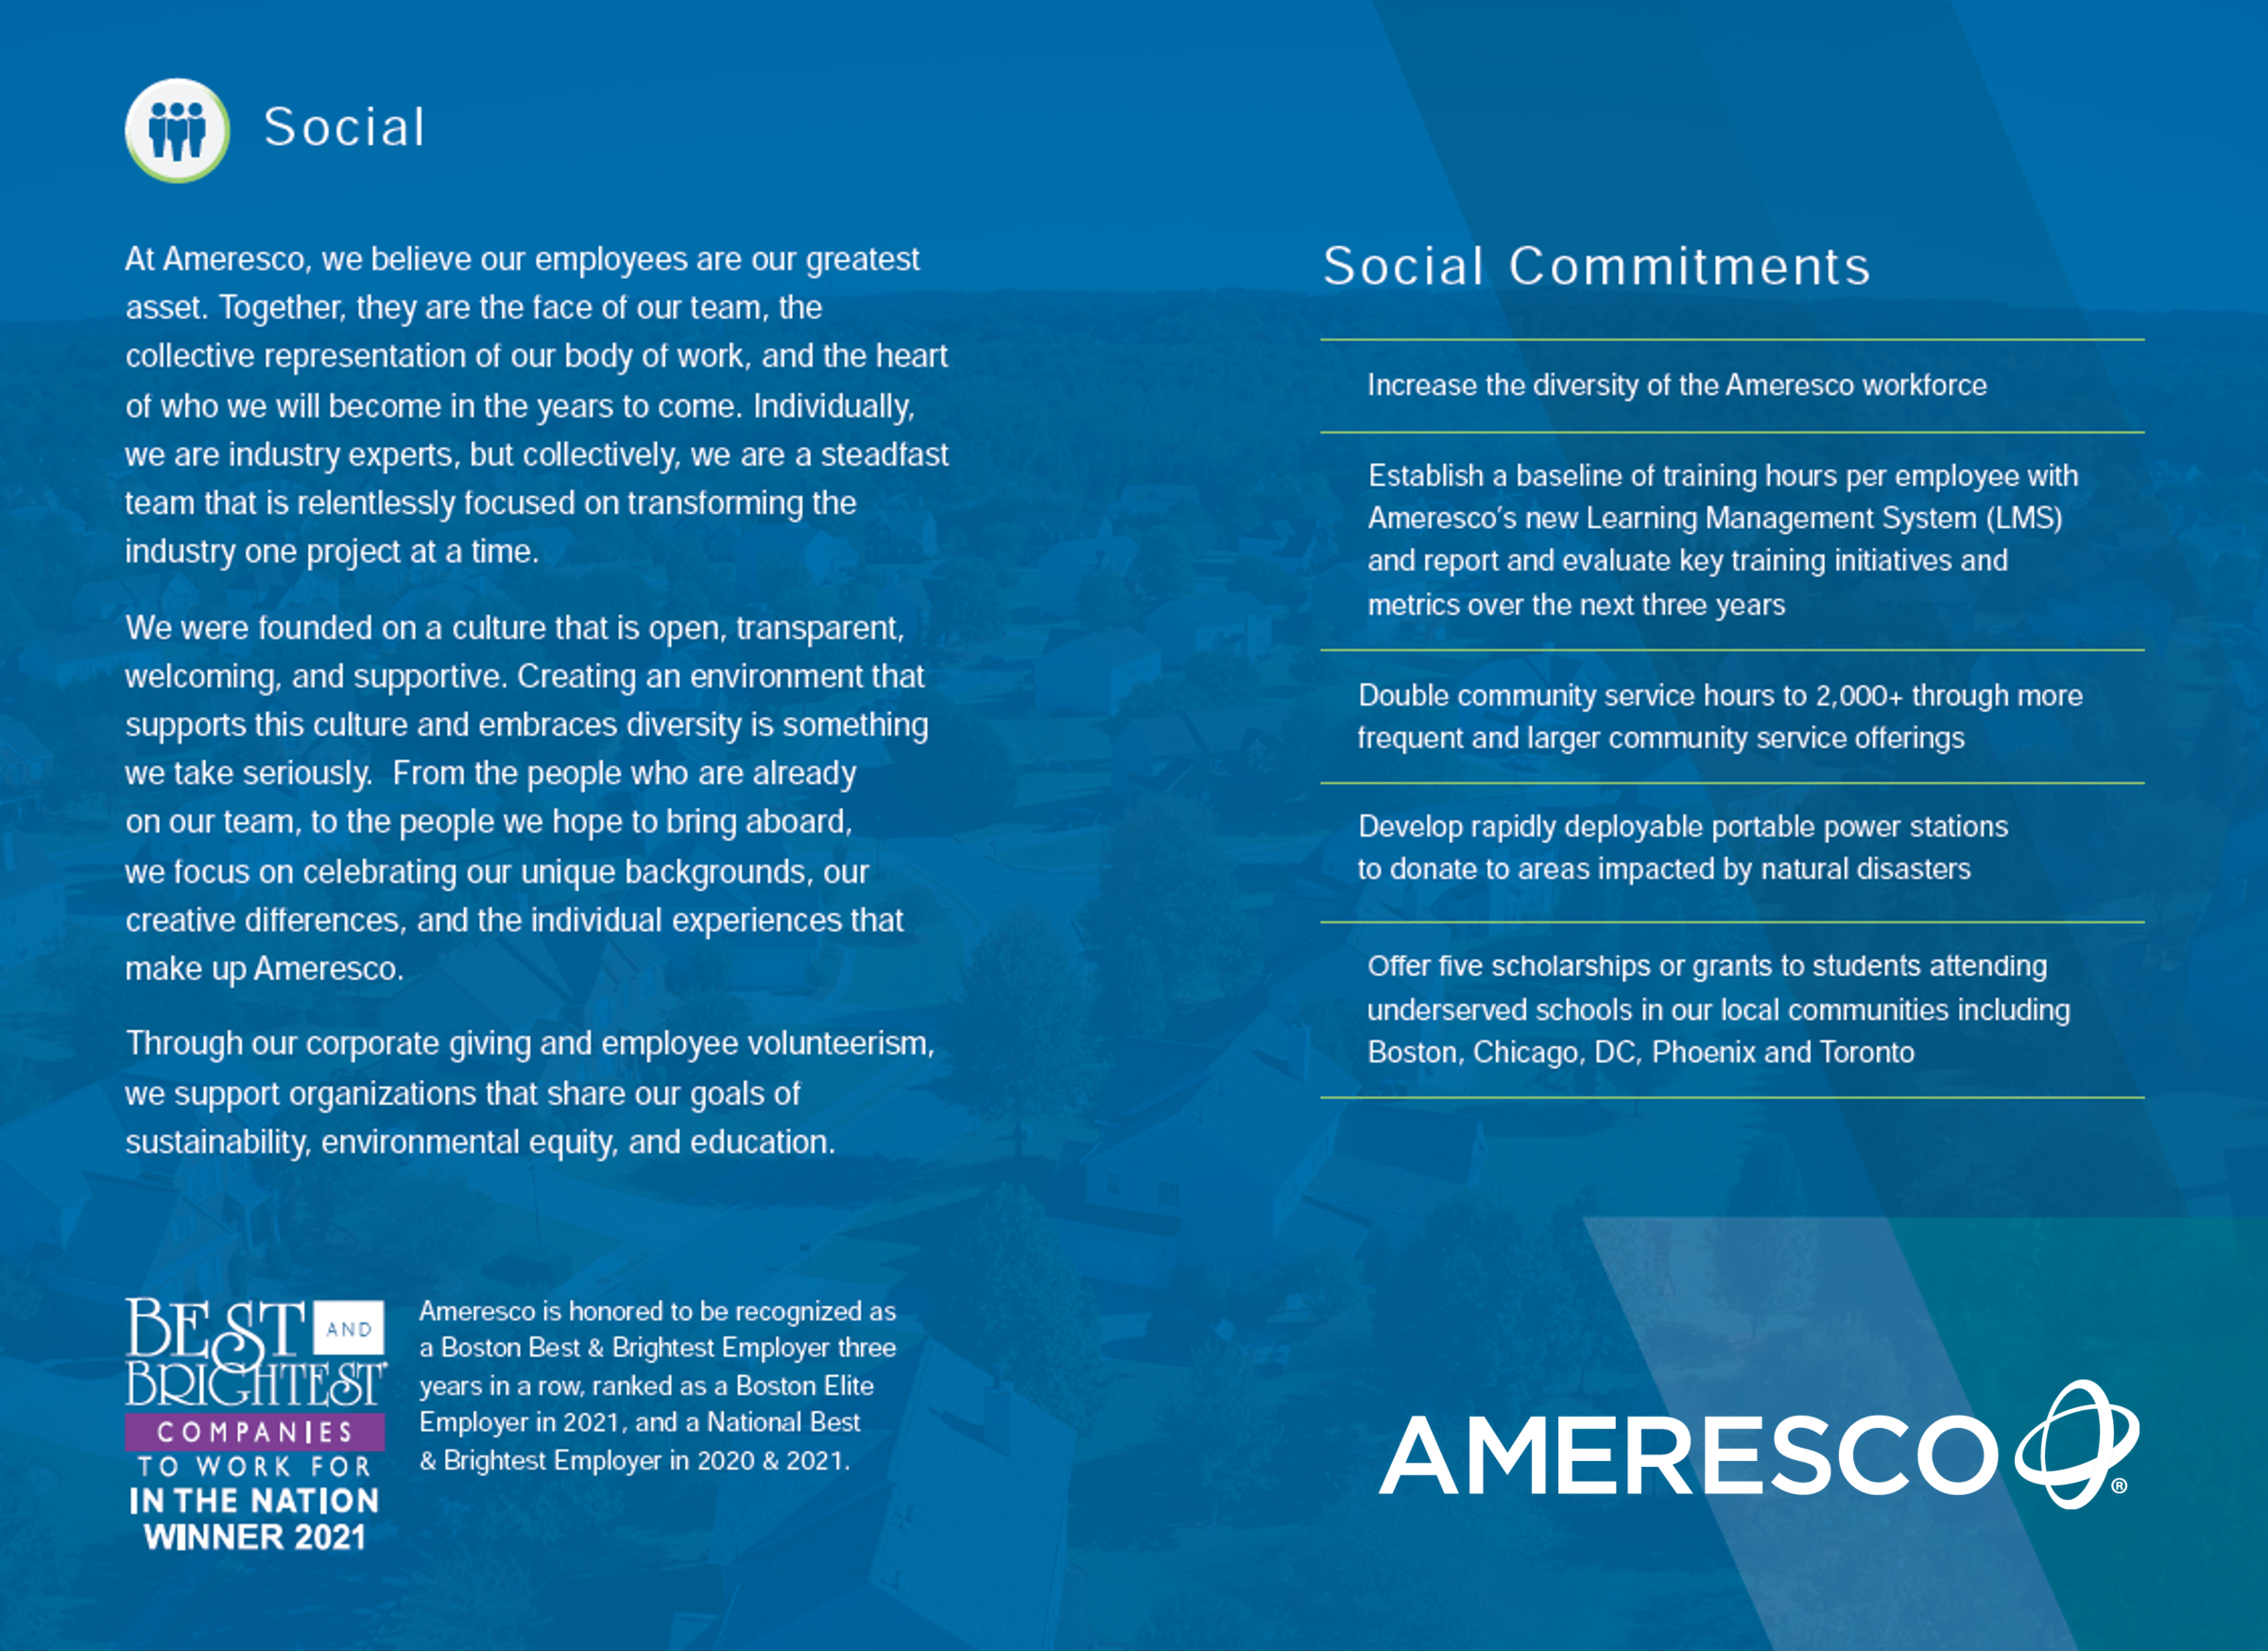 Reproduction of the Social page in the Ameresco 2021 ESG Report